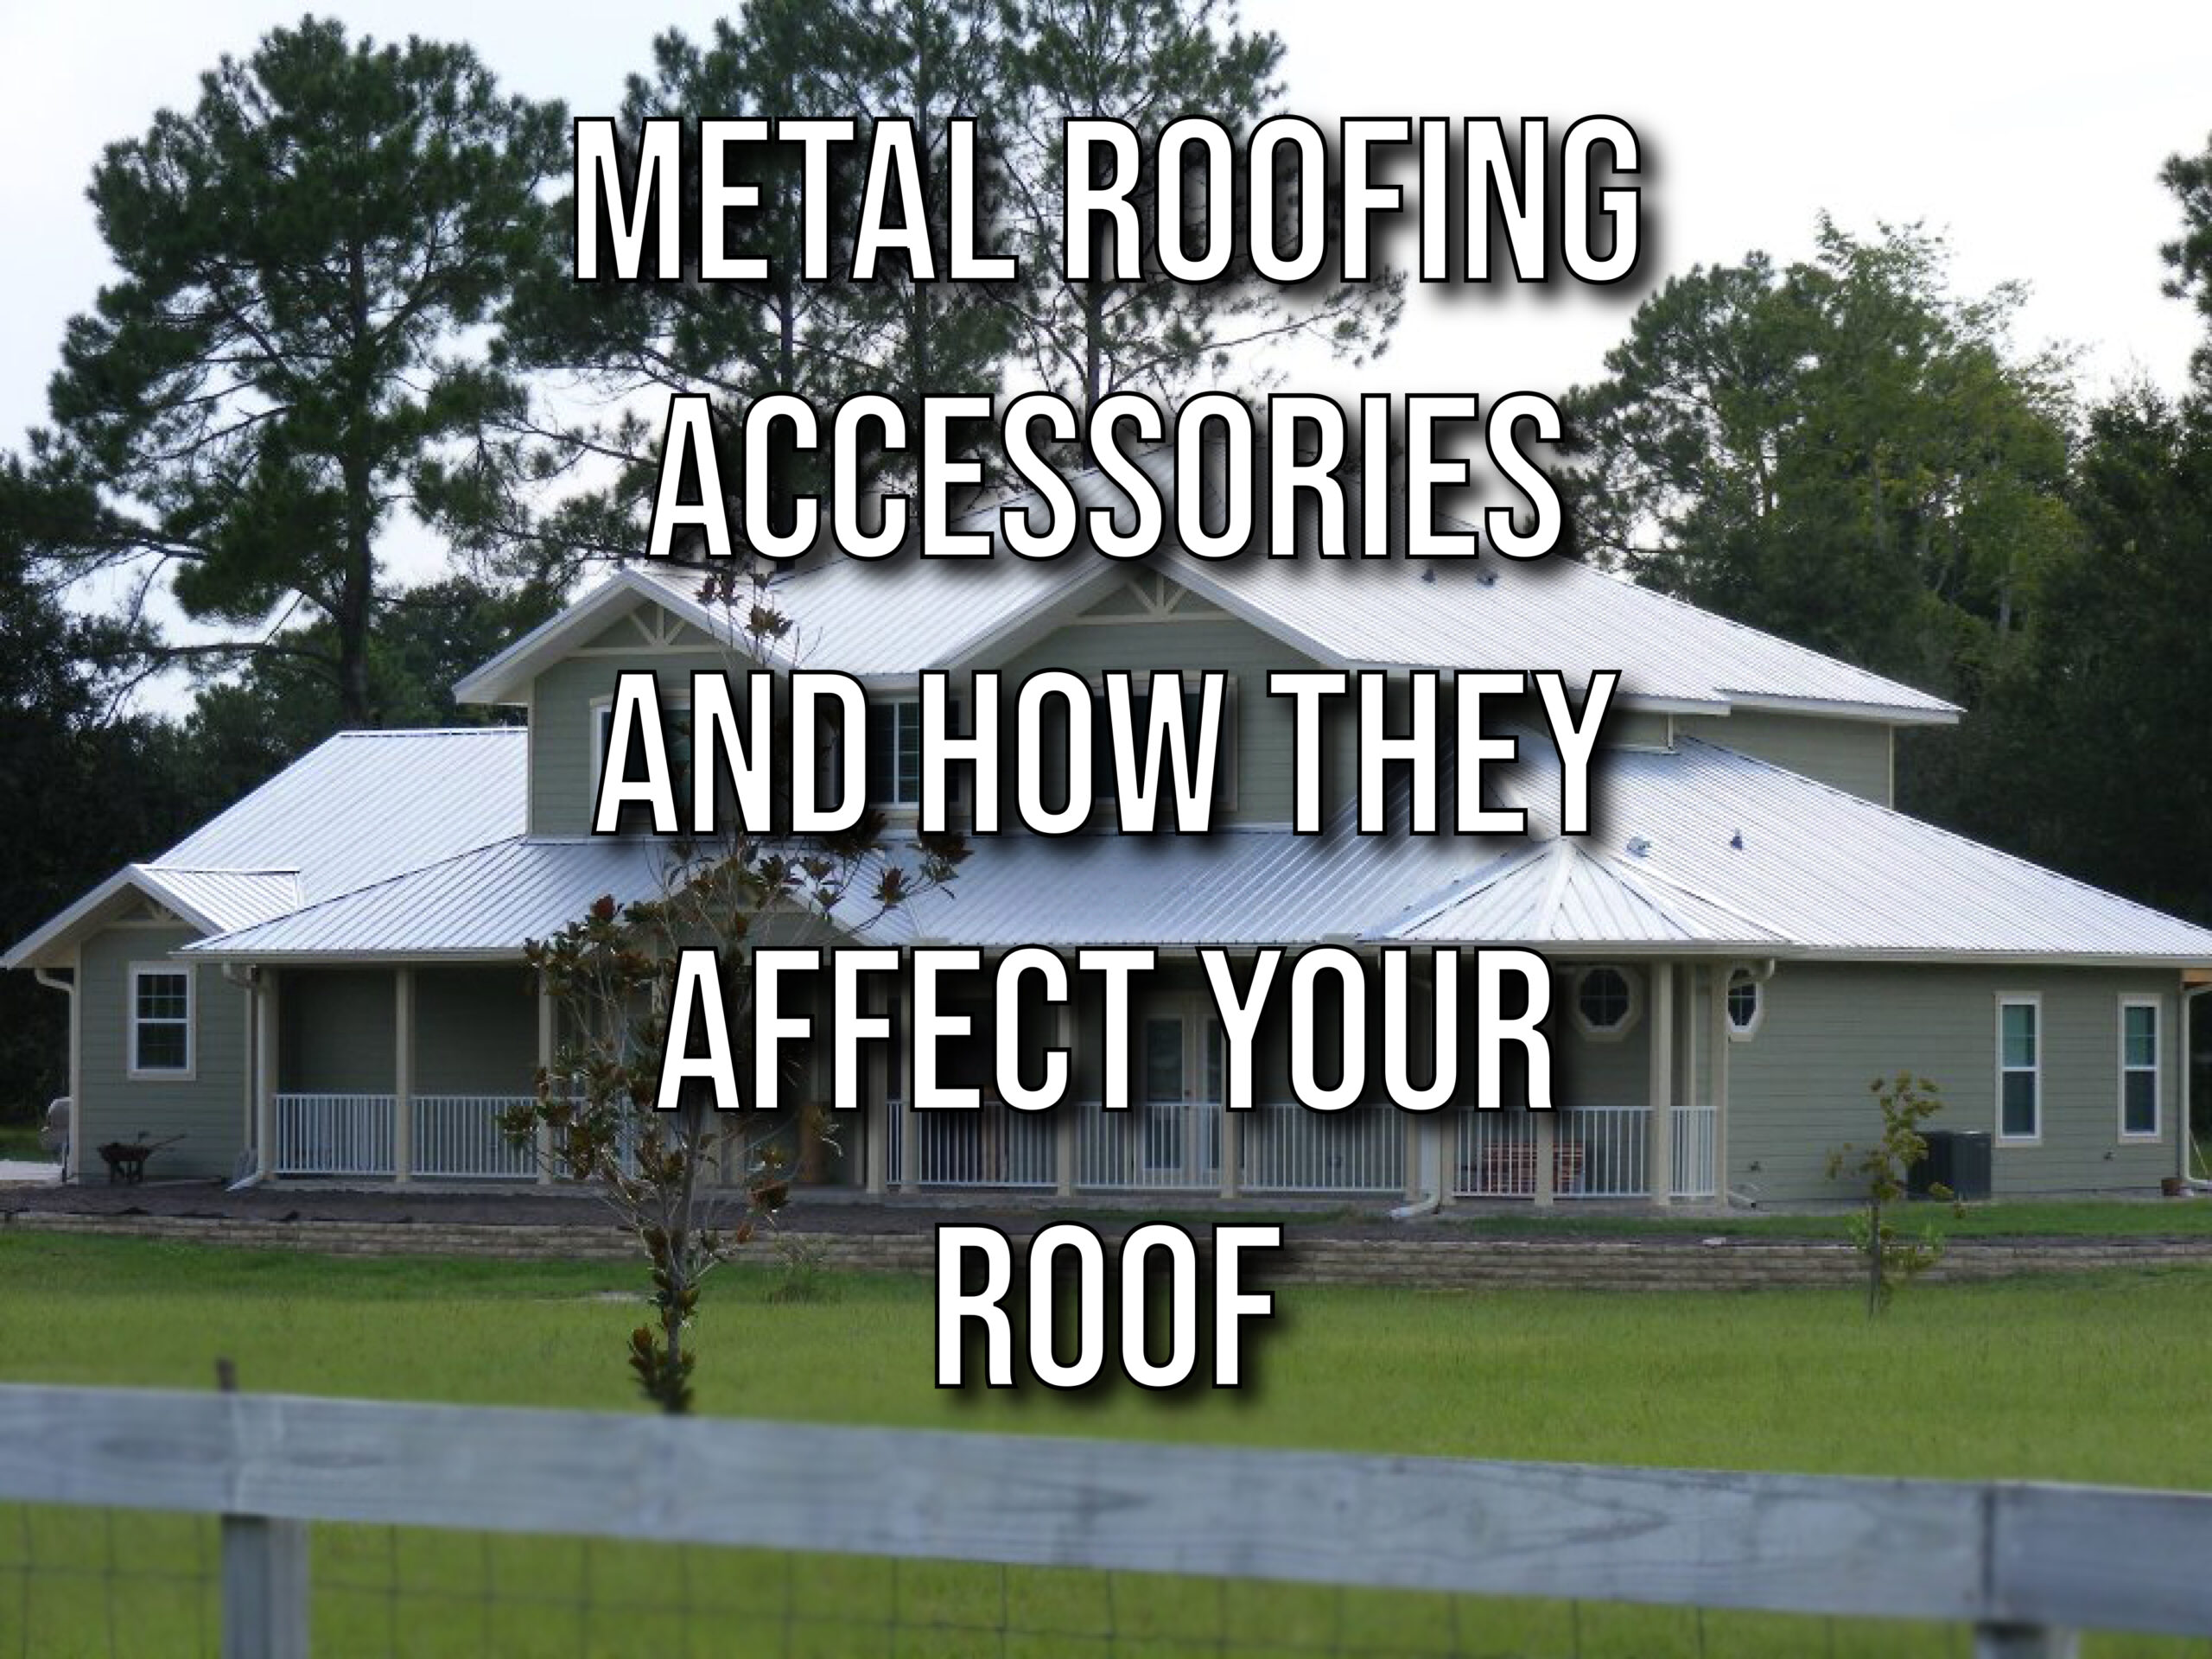 Metal Roofing Accessories and How They Affect Your Roof